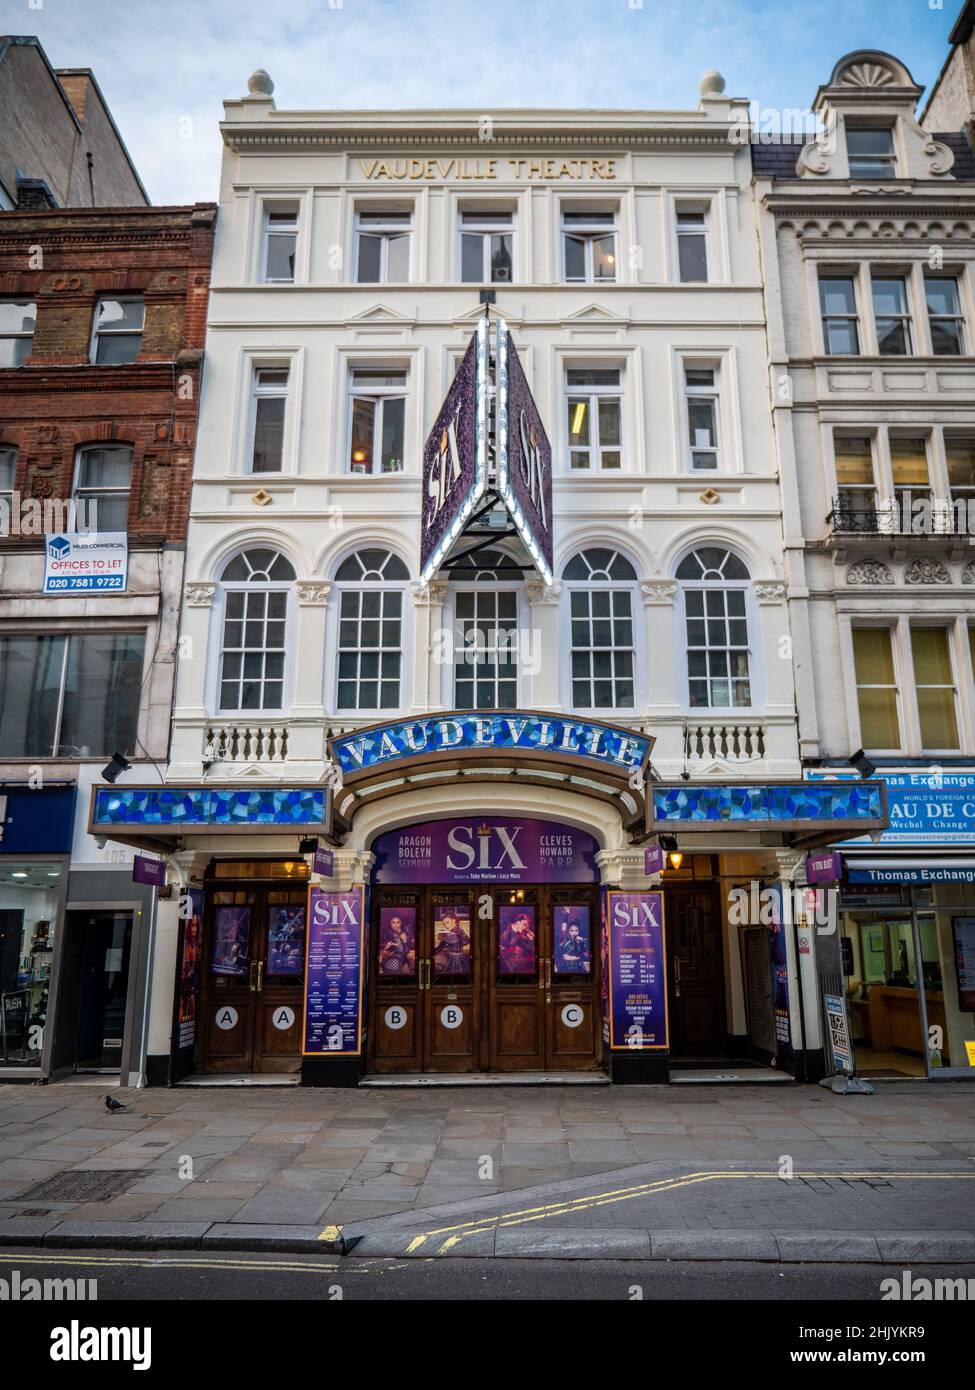 Das Vaudeville Theatre, London. The façade to the West End Theatre on the Strand mit dem Musical Six in Produktion. Stockfoto